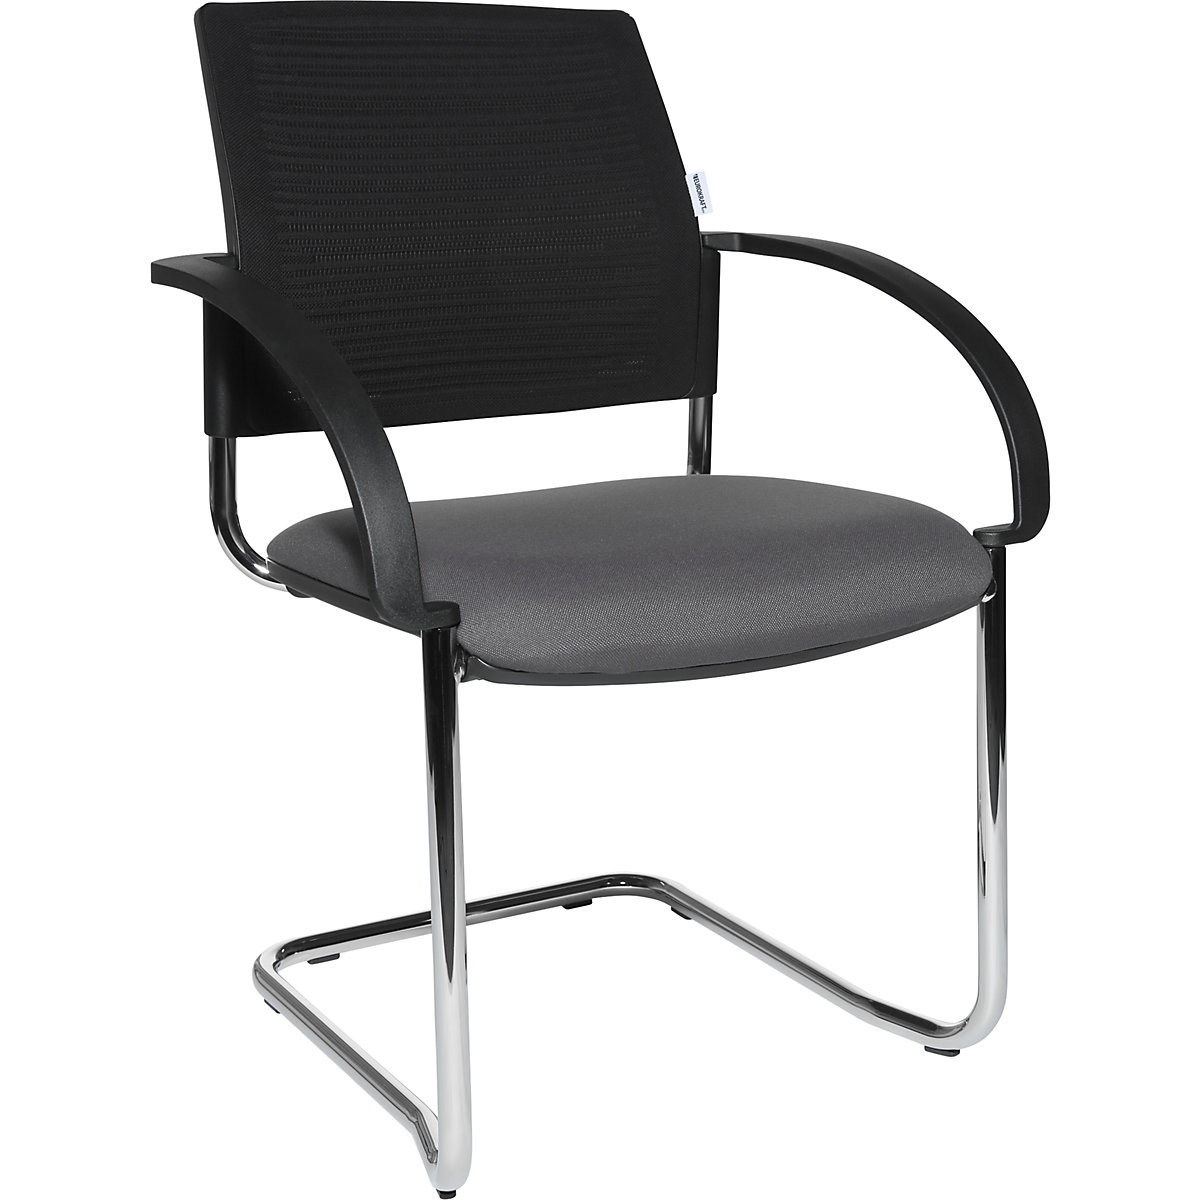 Cantilever chairs, pack of 2 - eurokraft pro